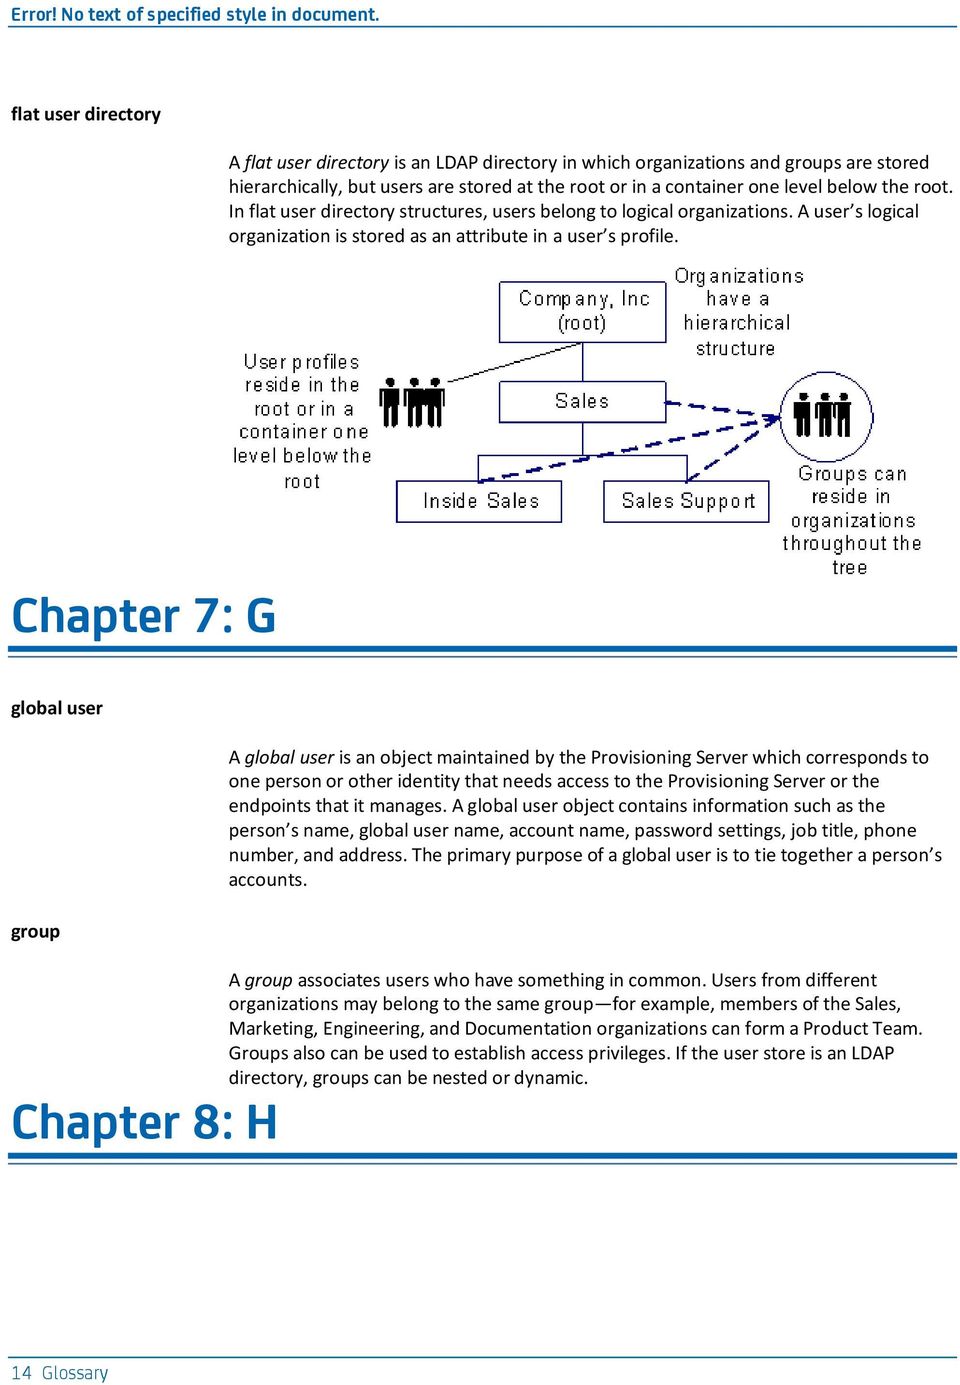 Chapter 7: G global user group A global user is an object maintained by the Provisioning Server which corresponds to one person or other identity that needs access to the Provisioning Server or the